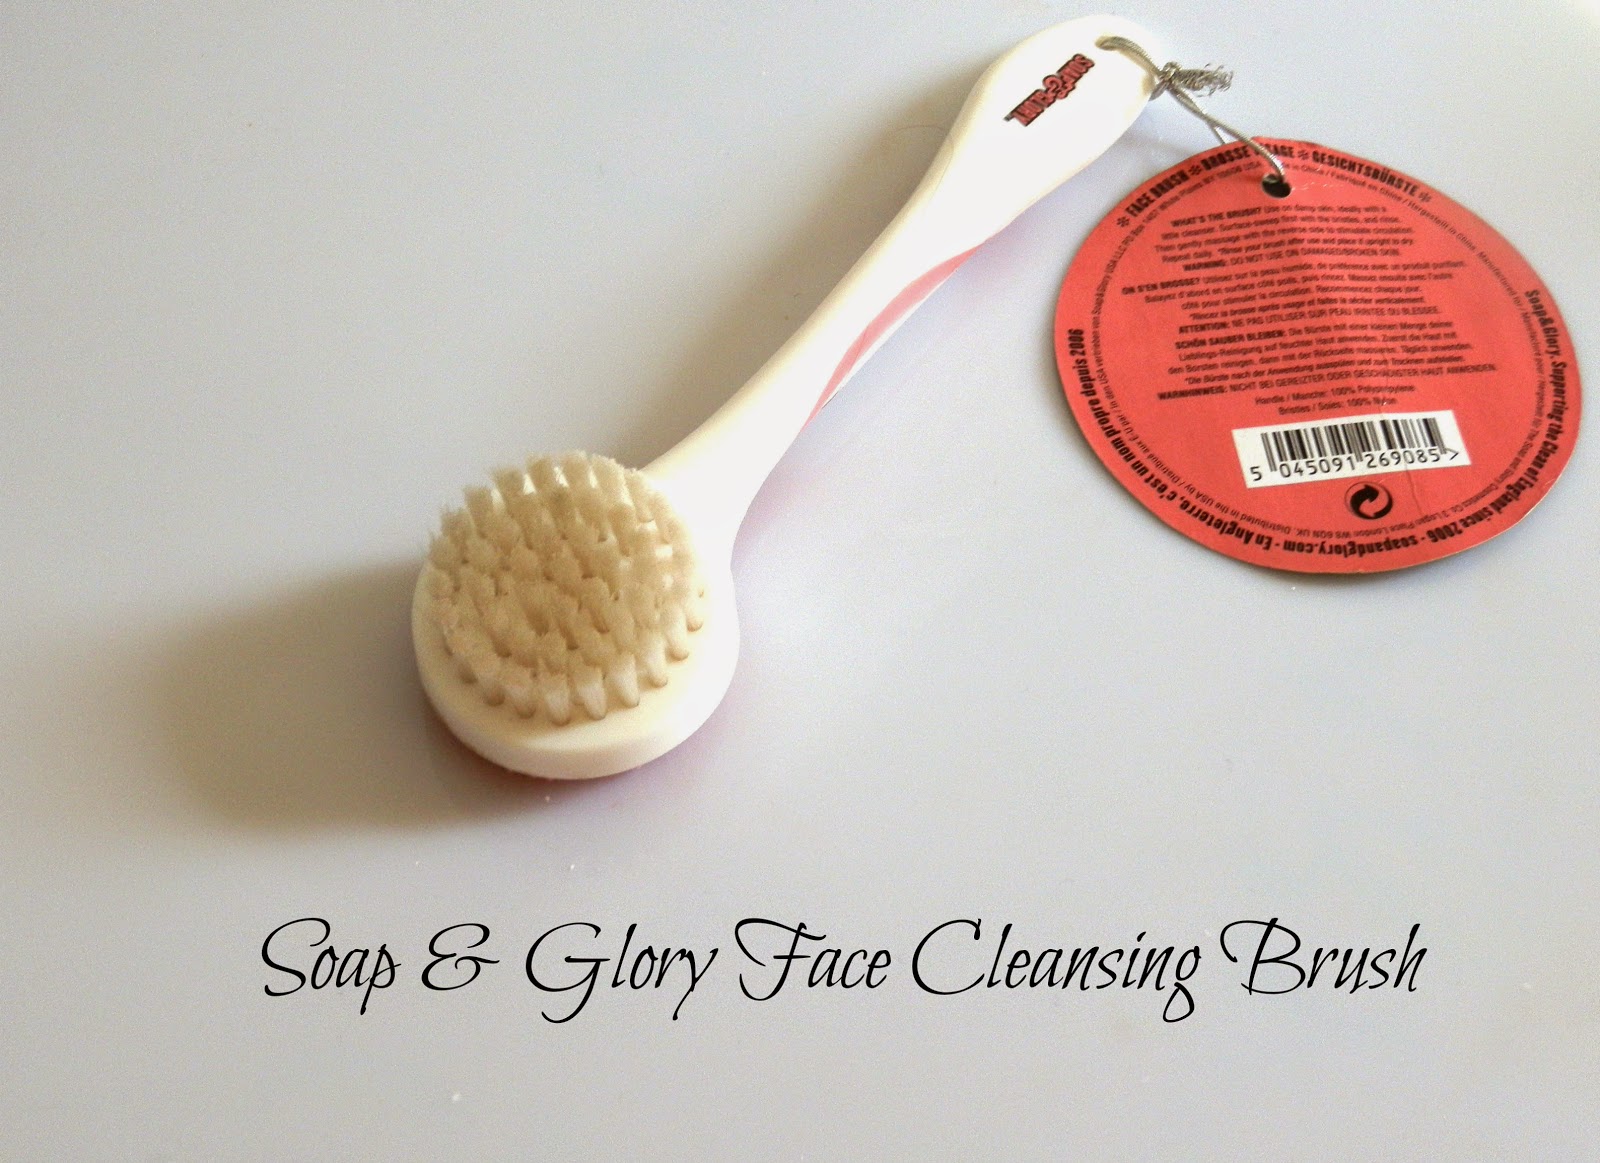 Soap & Glory Face Cleansing Brush Reviews